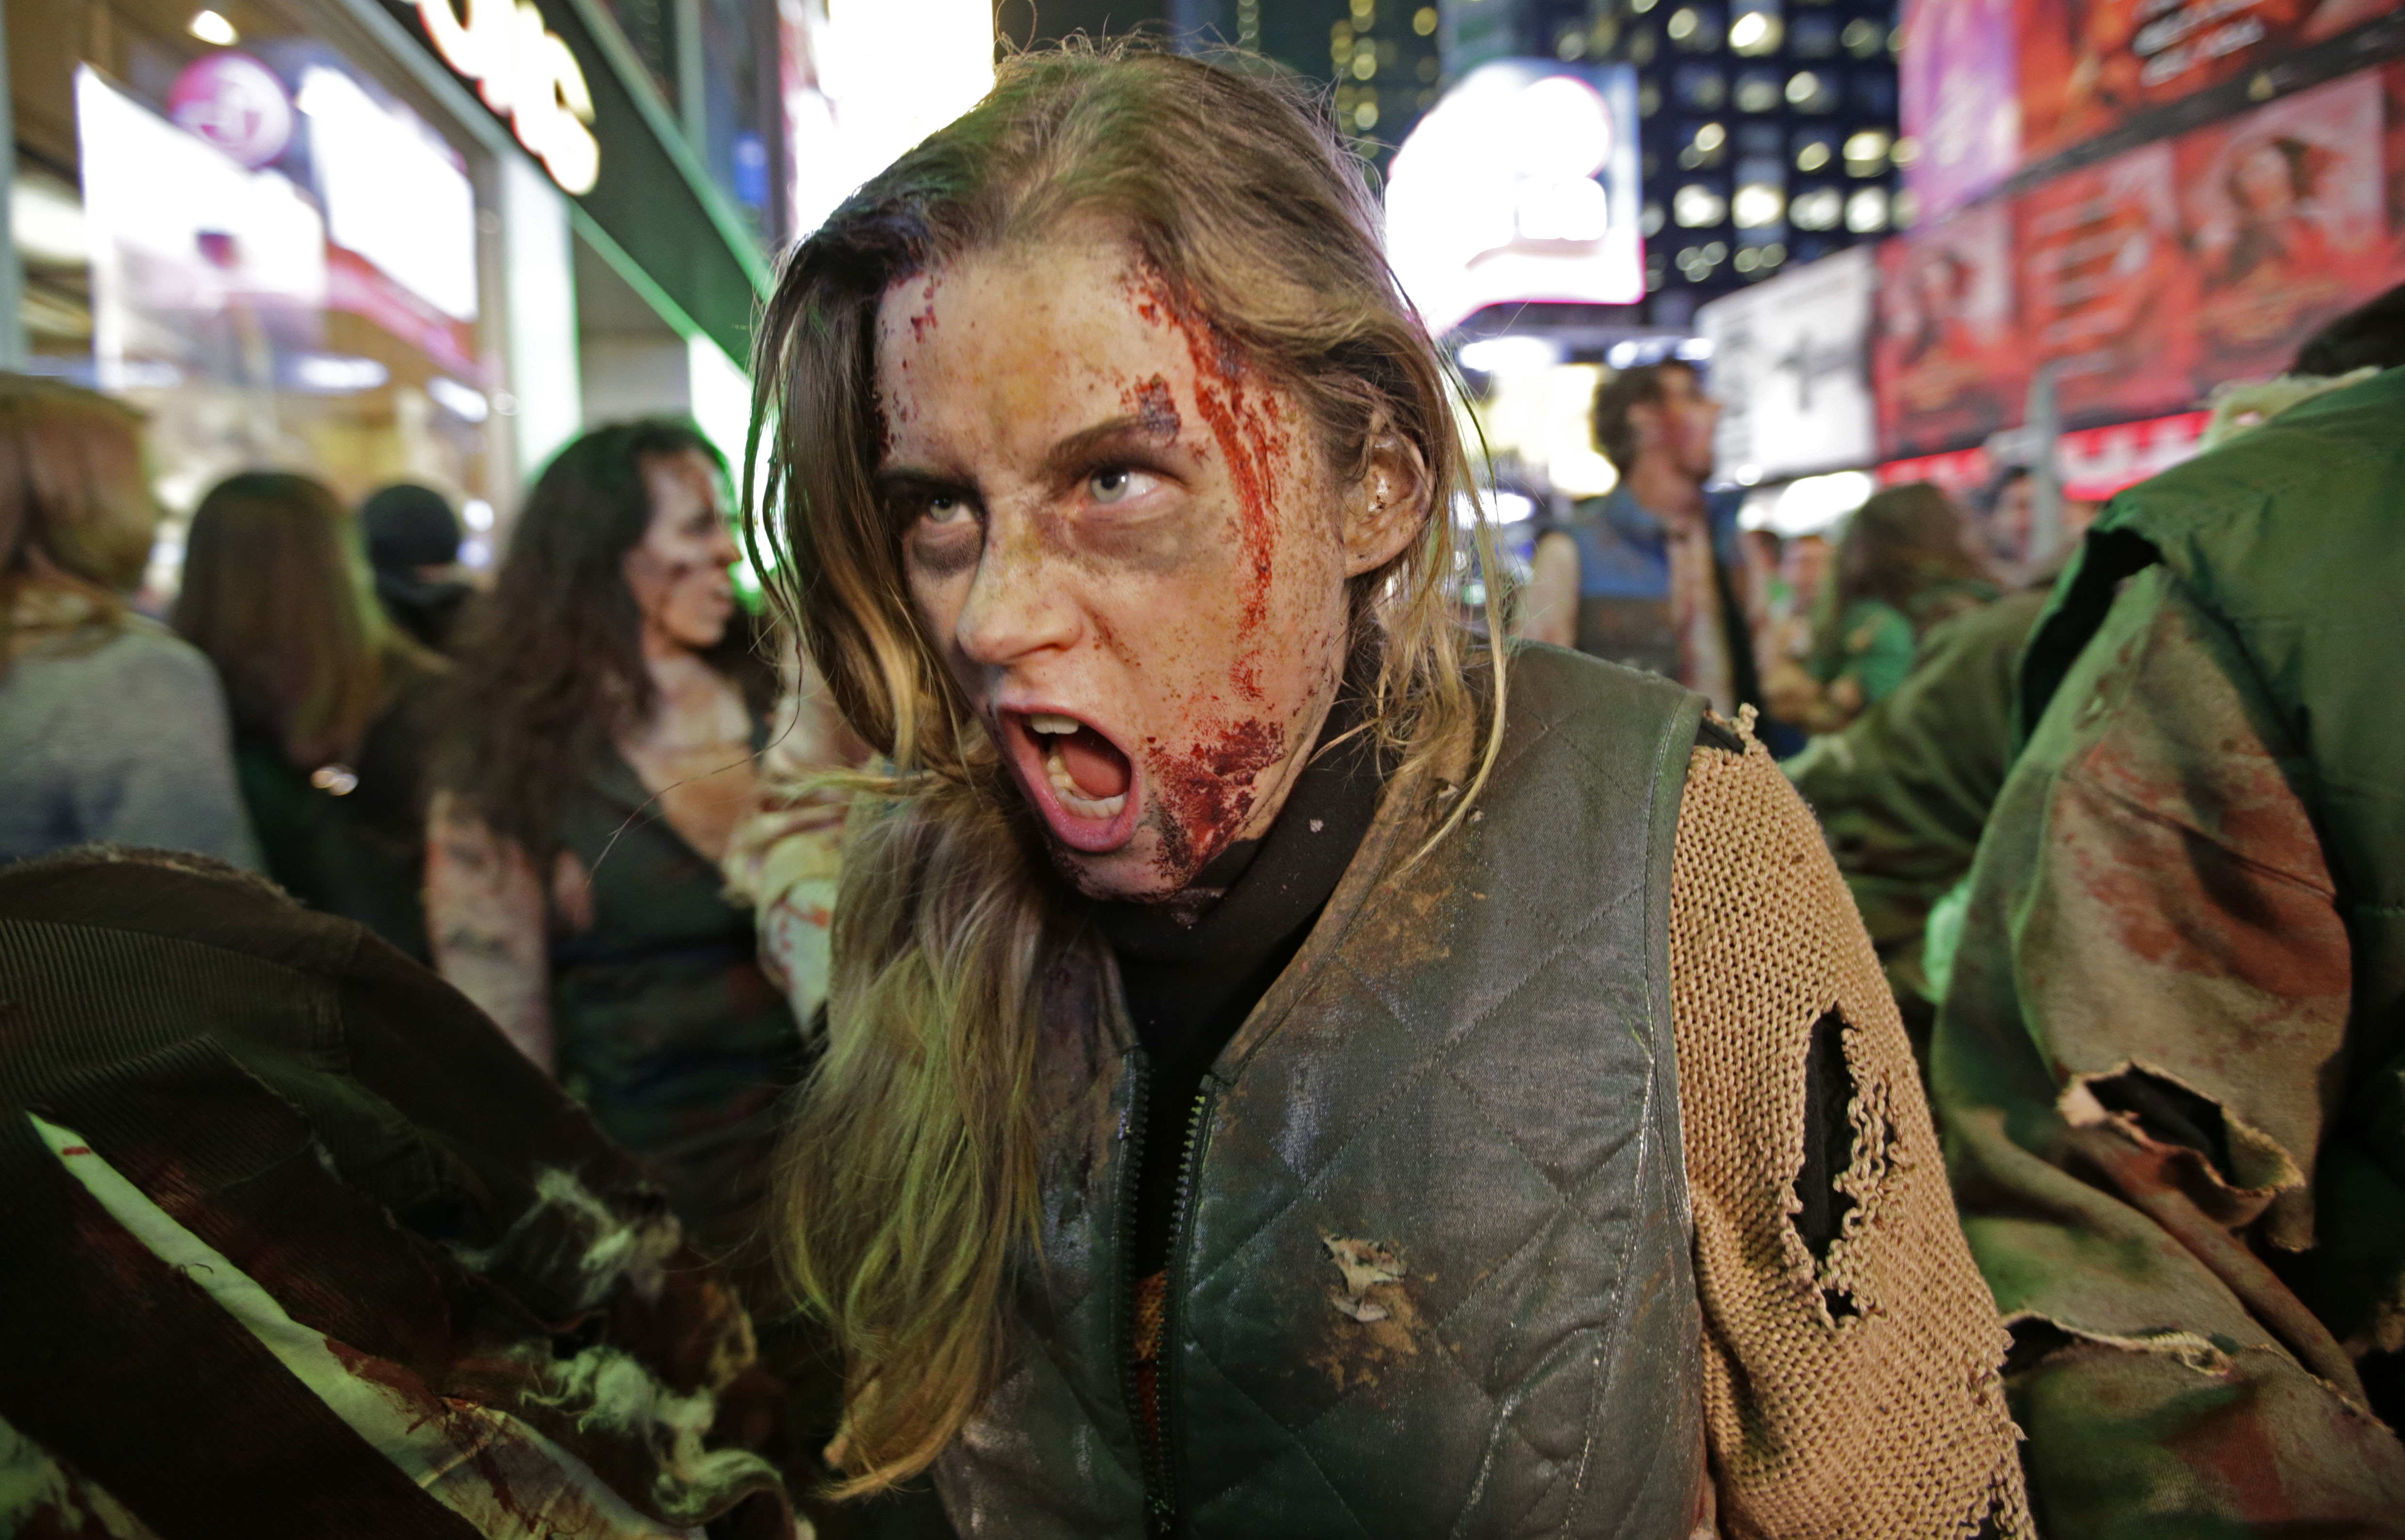 Which states are most likely to survive the zombie apocalypse?